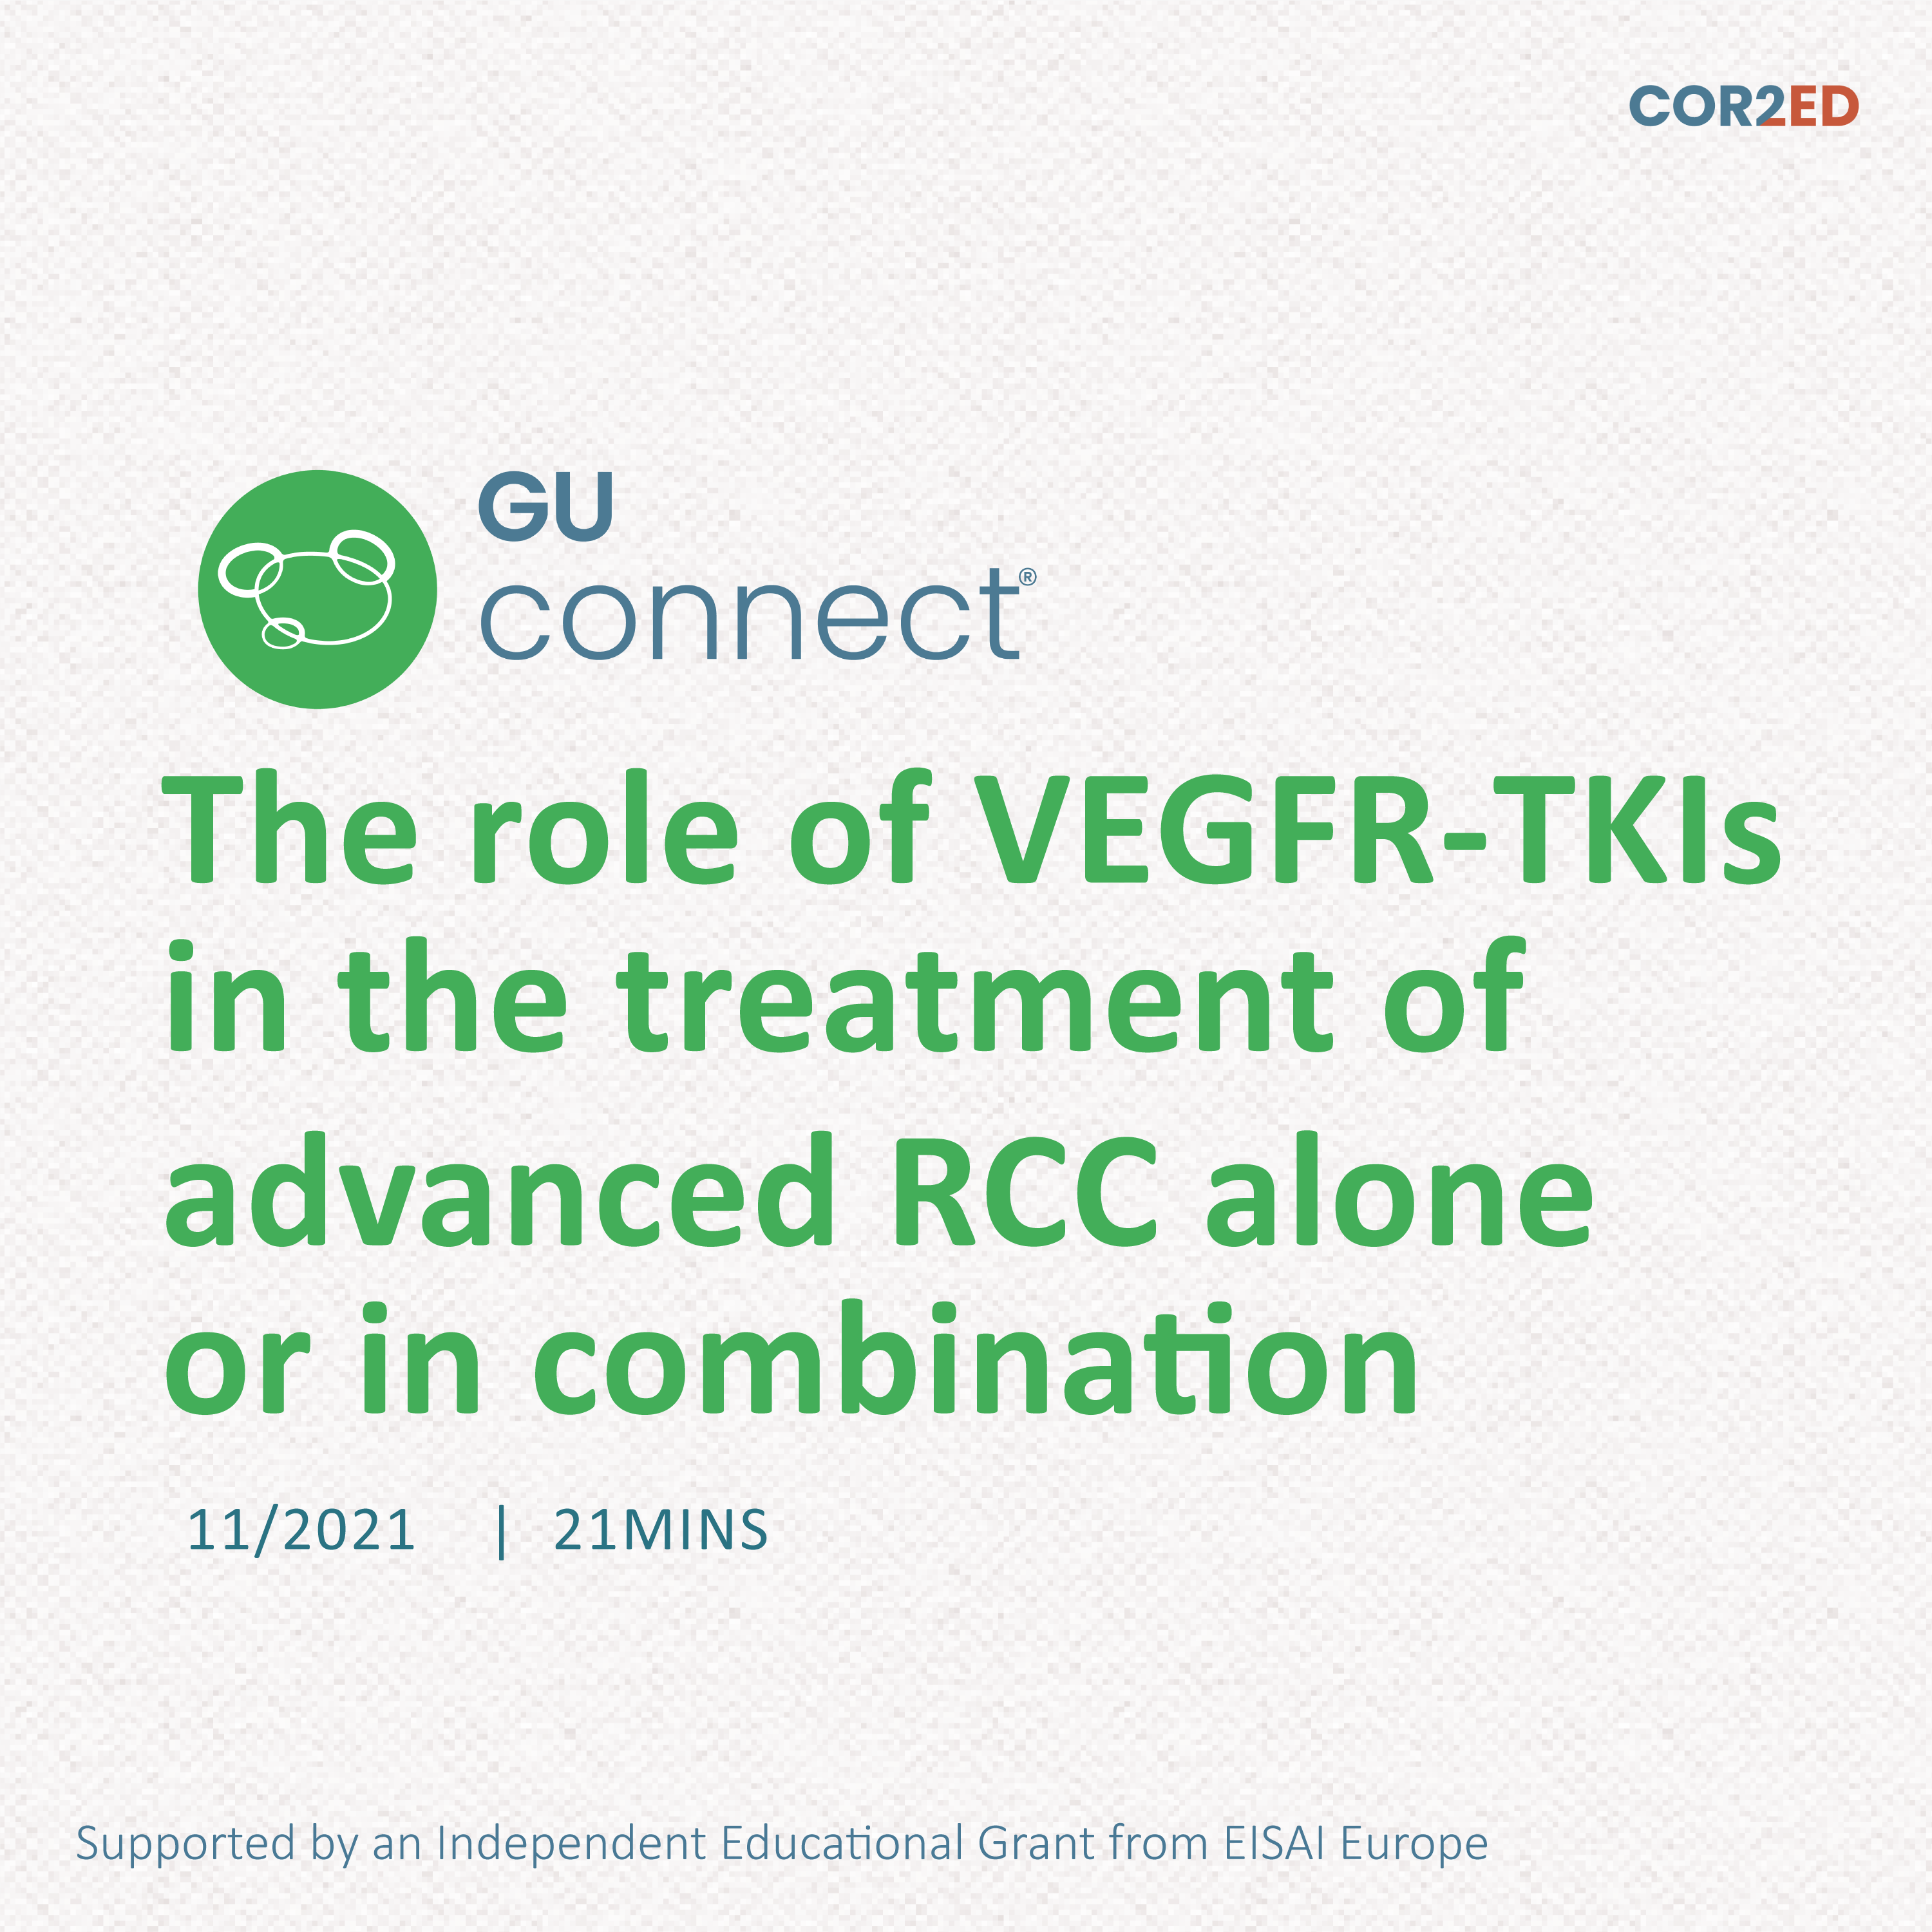 The role of VEGFR-TKIs in the treatment of advanced RCC alone or in combination